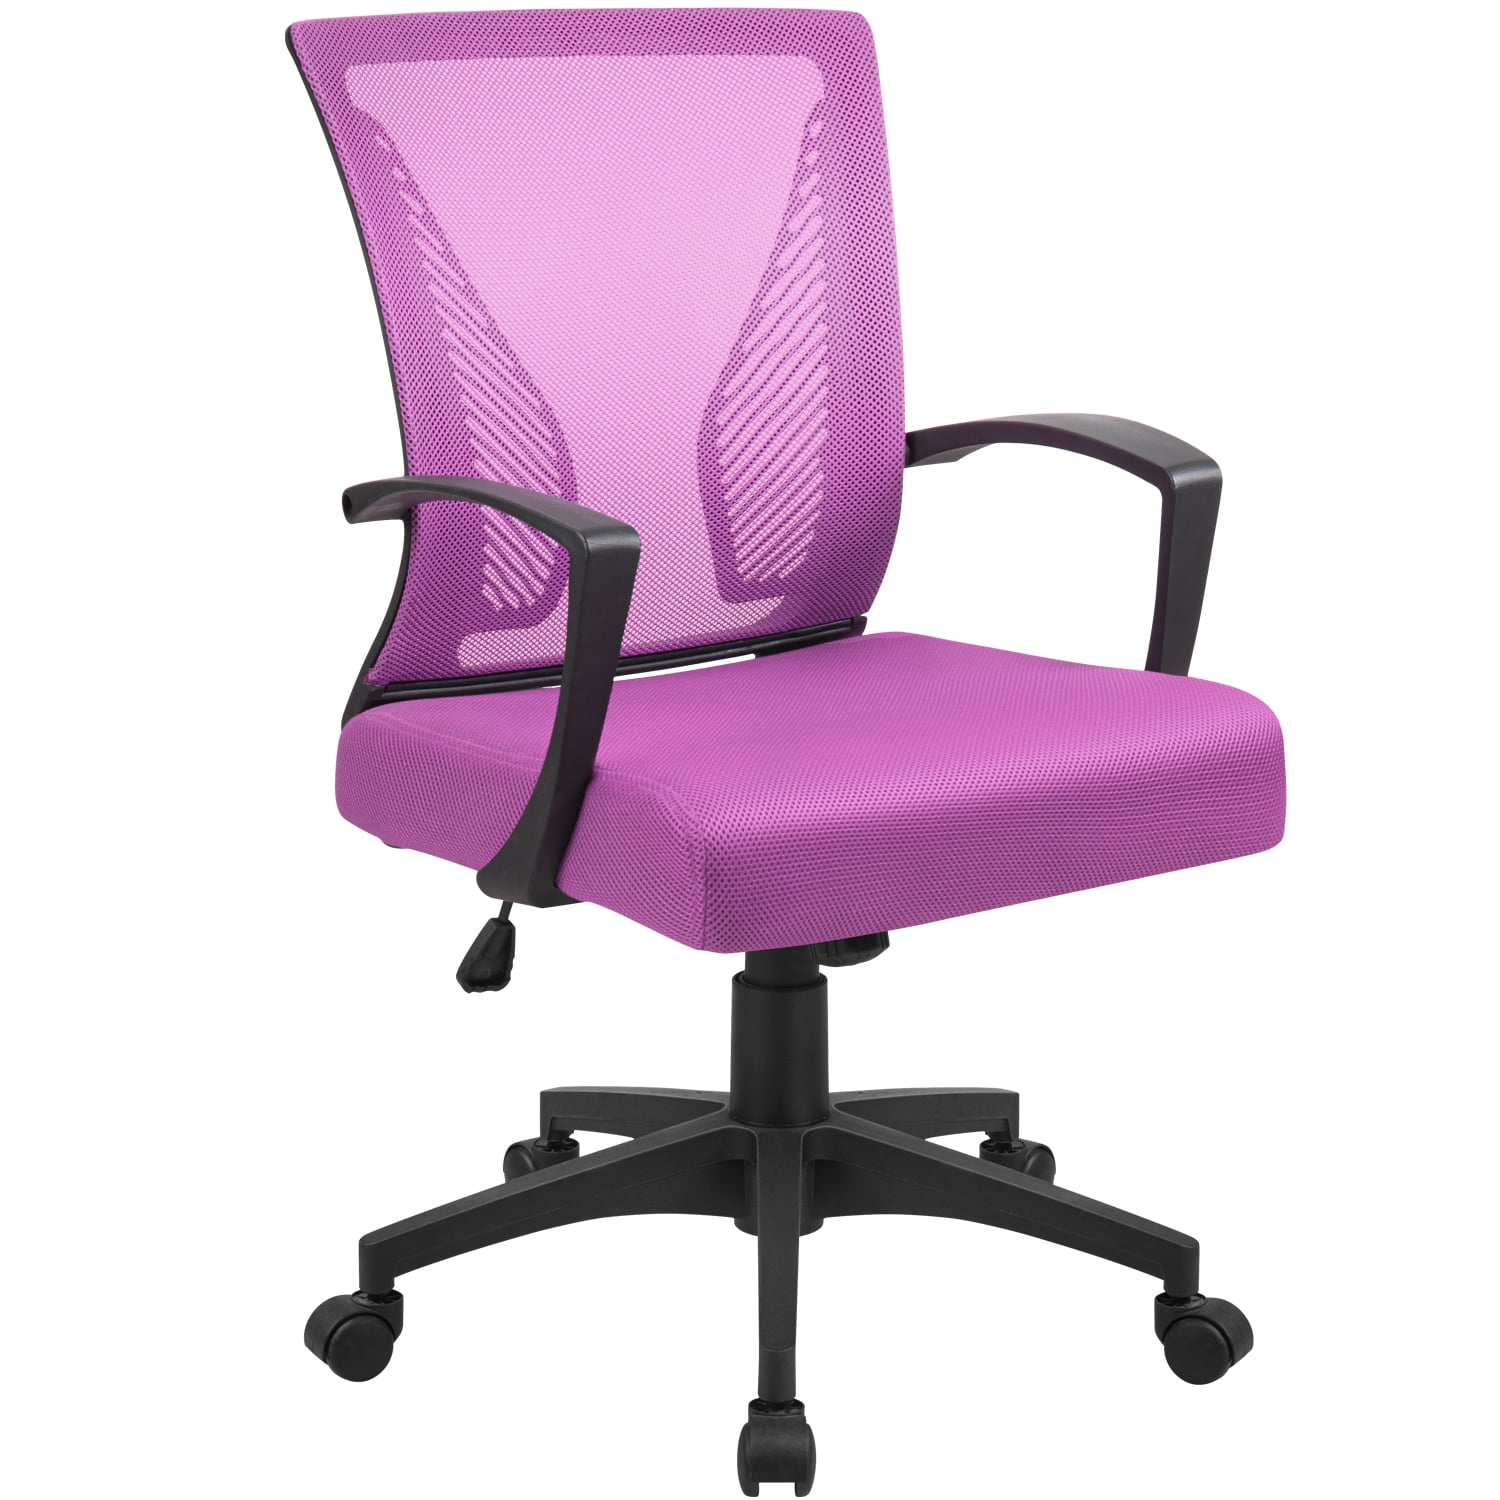 Furmax Office Mid Back Swivel Lumbar Support Desk, Computer Ergonomic Mesh Chair with Armrest, Pink